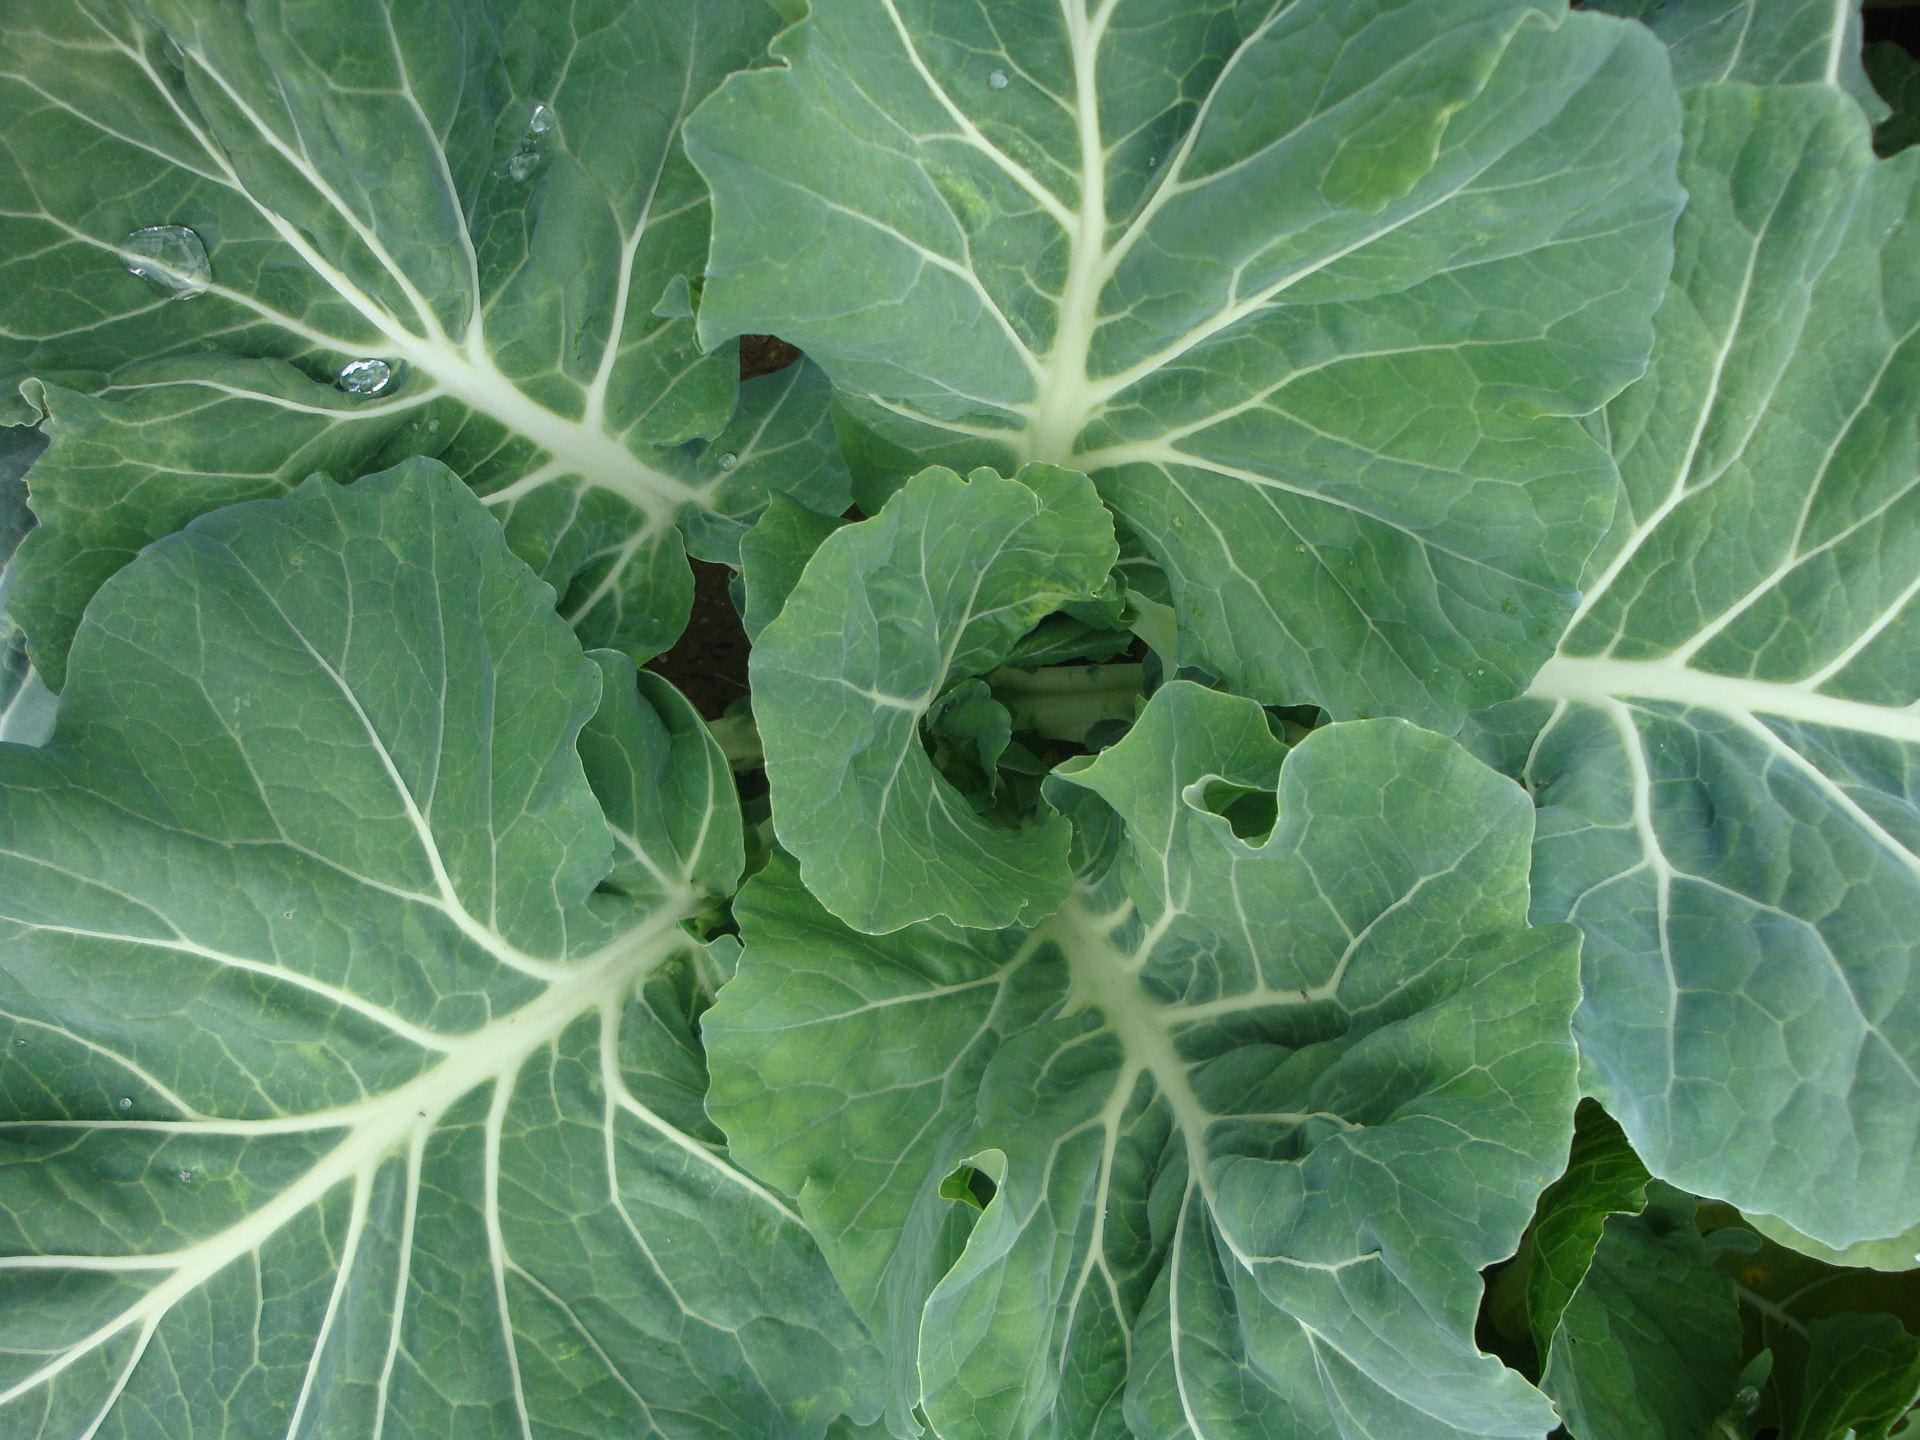 Close up of center of kale plant